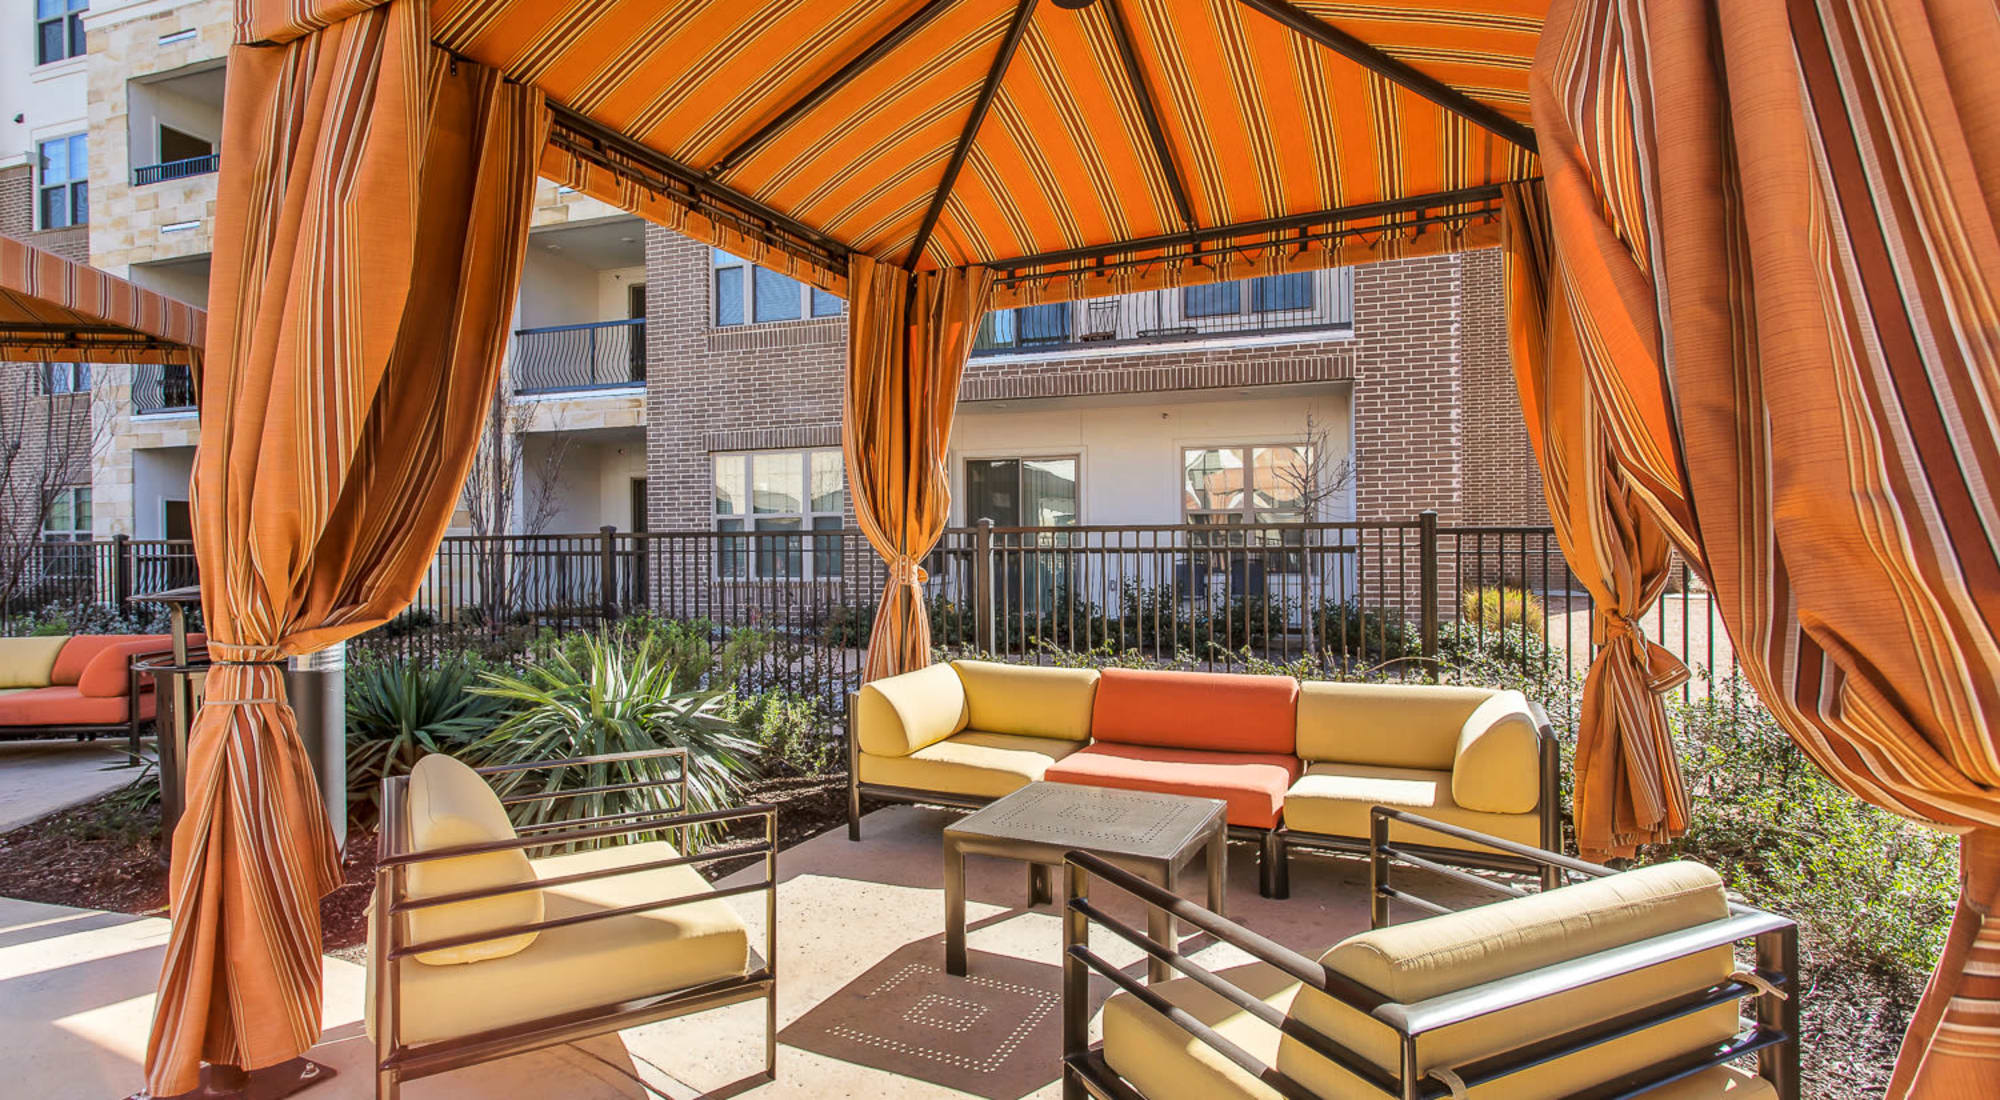 Covered cabanas by the pool at Villas at the Rim in San Antonio, Texas